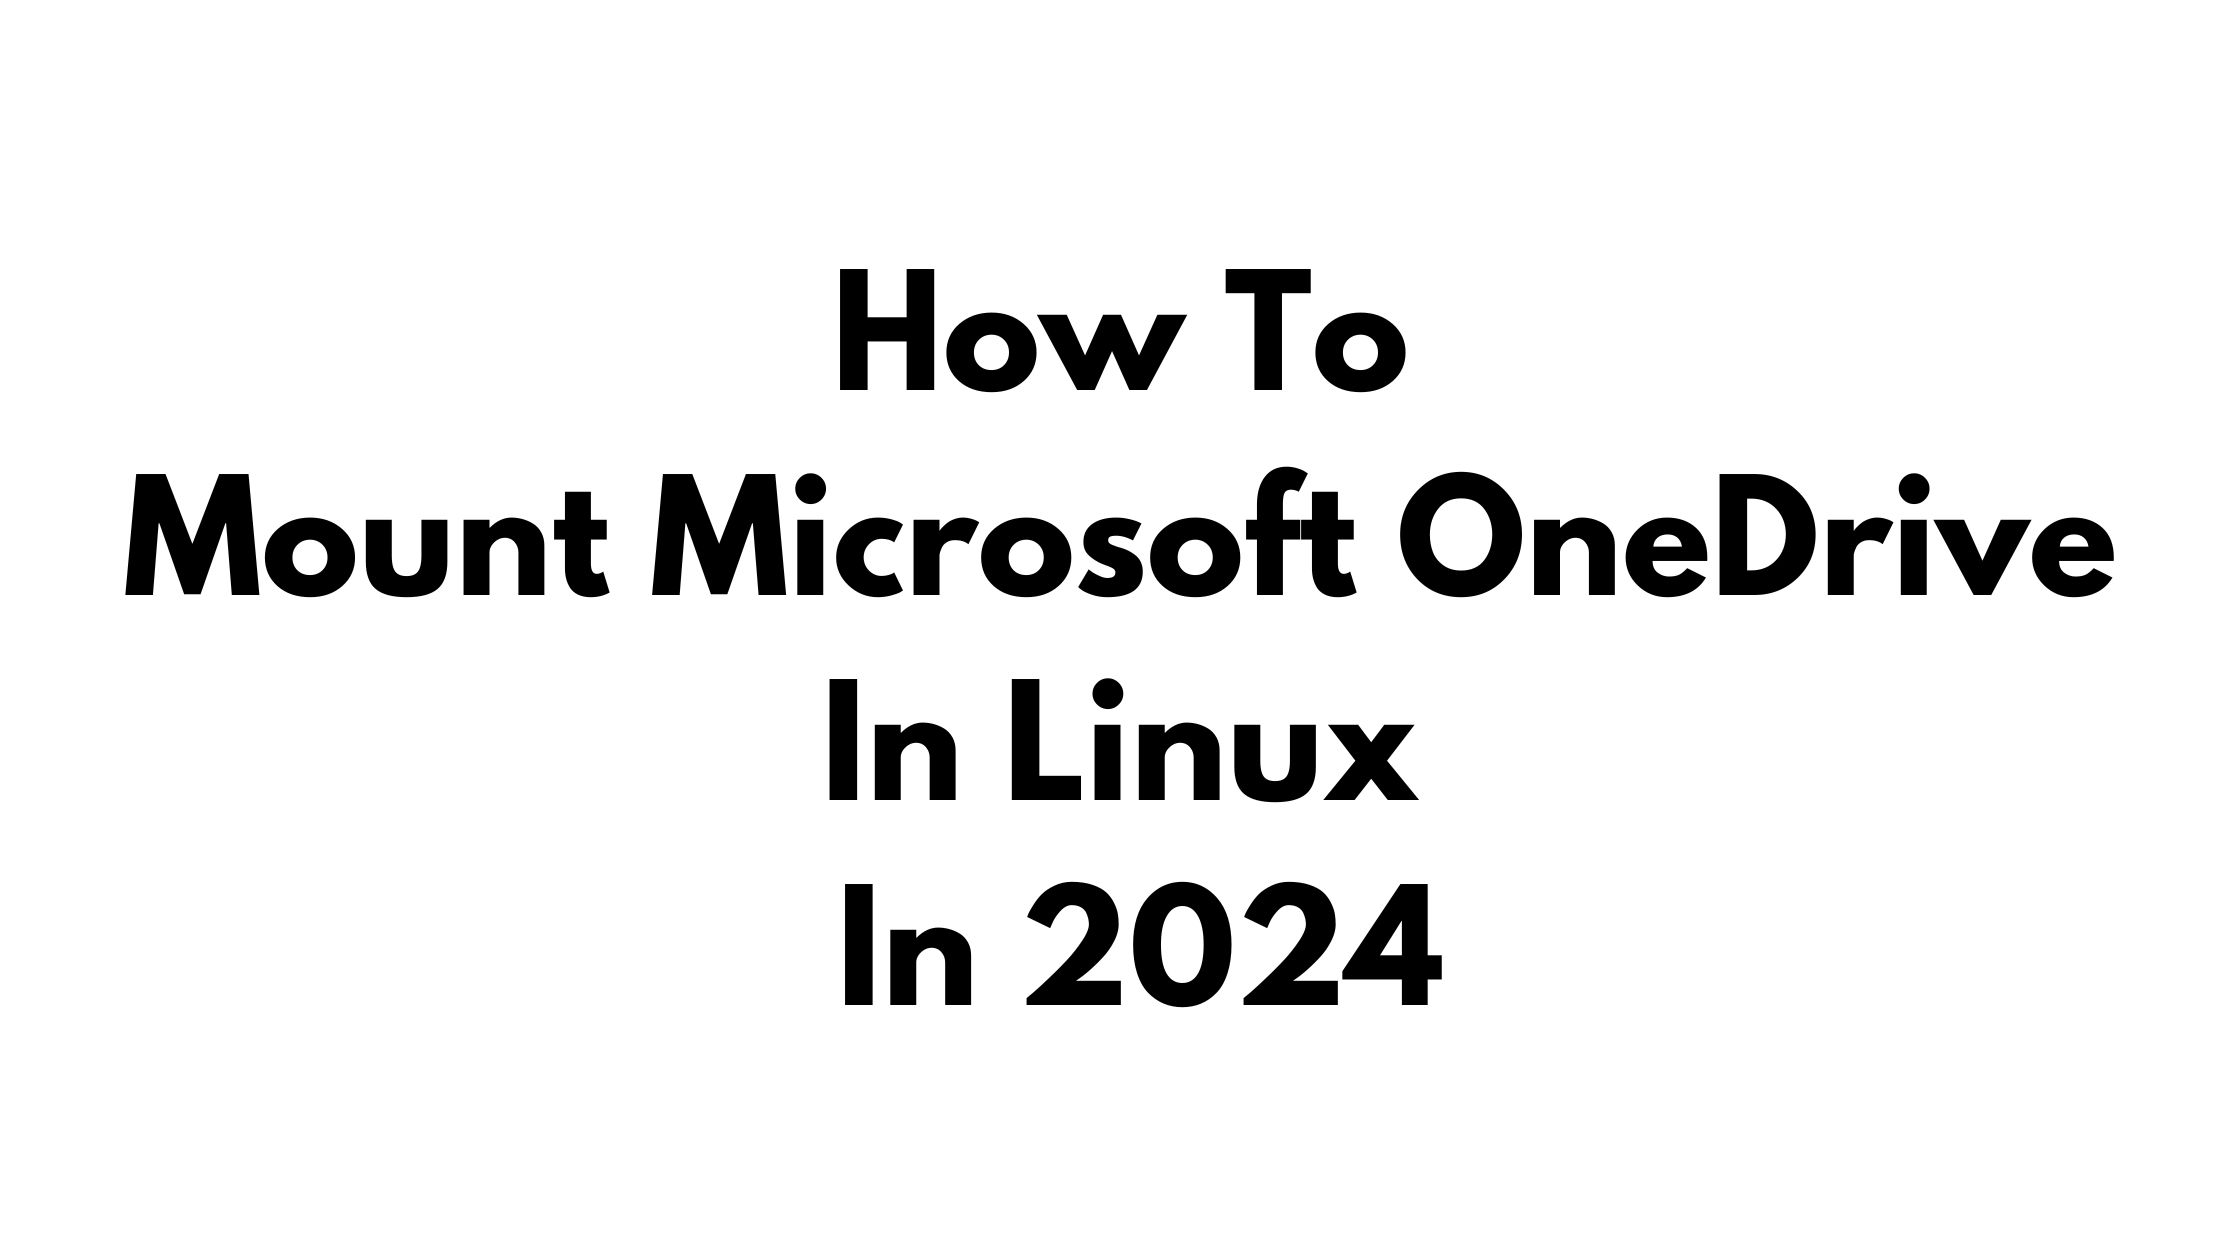 How To Mount Microsoft OneDrive In Linux In 2024